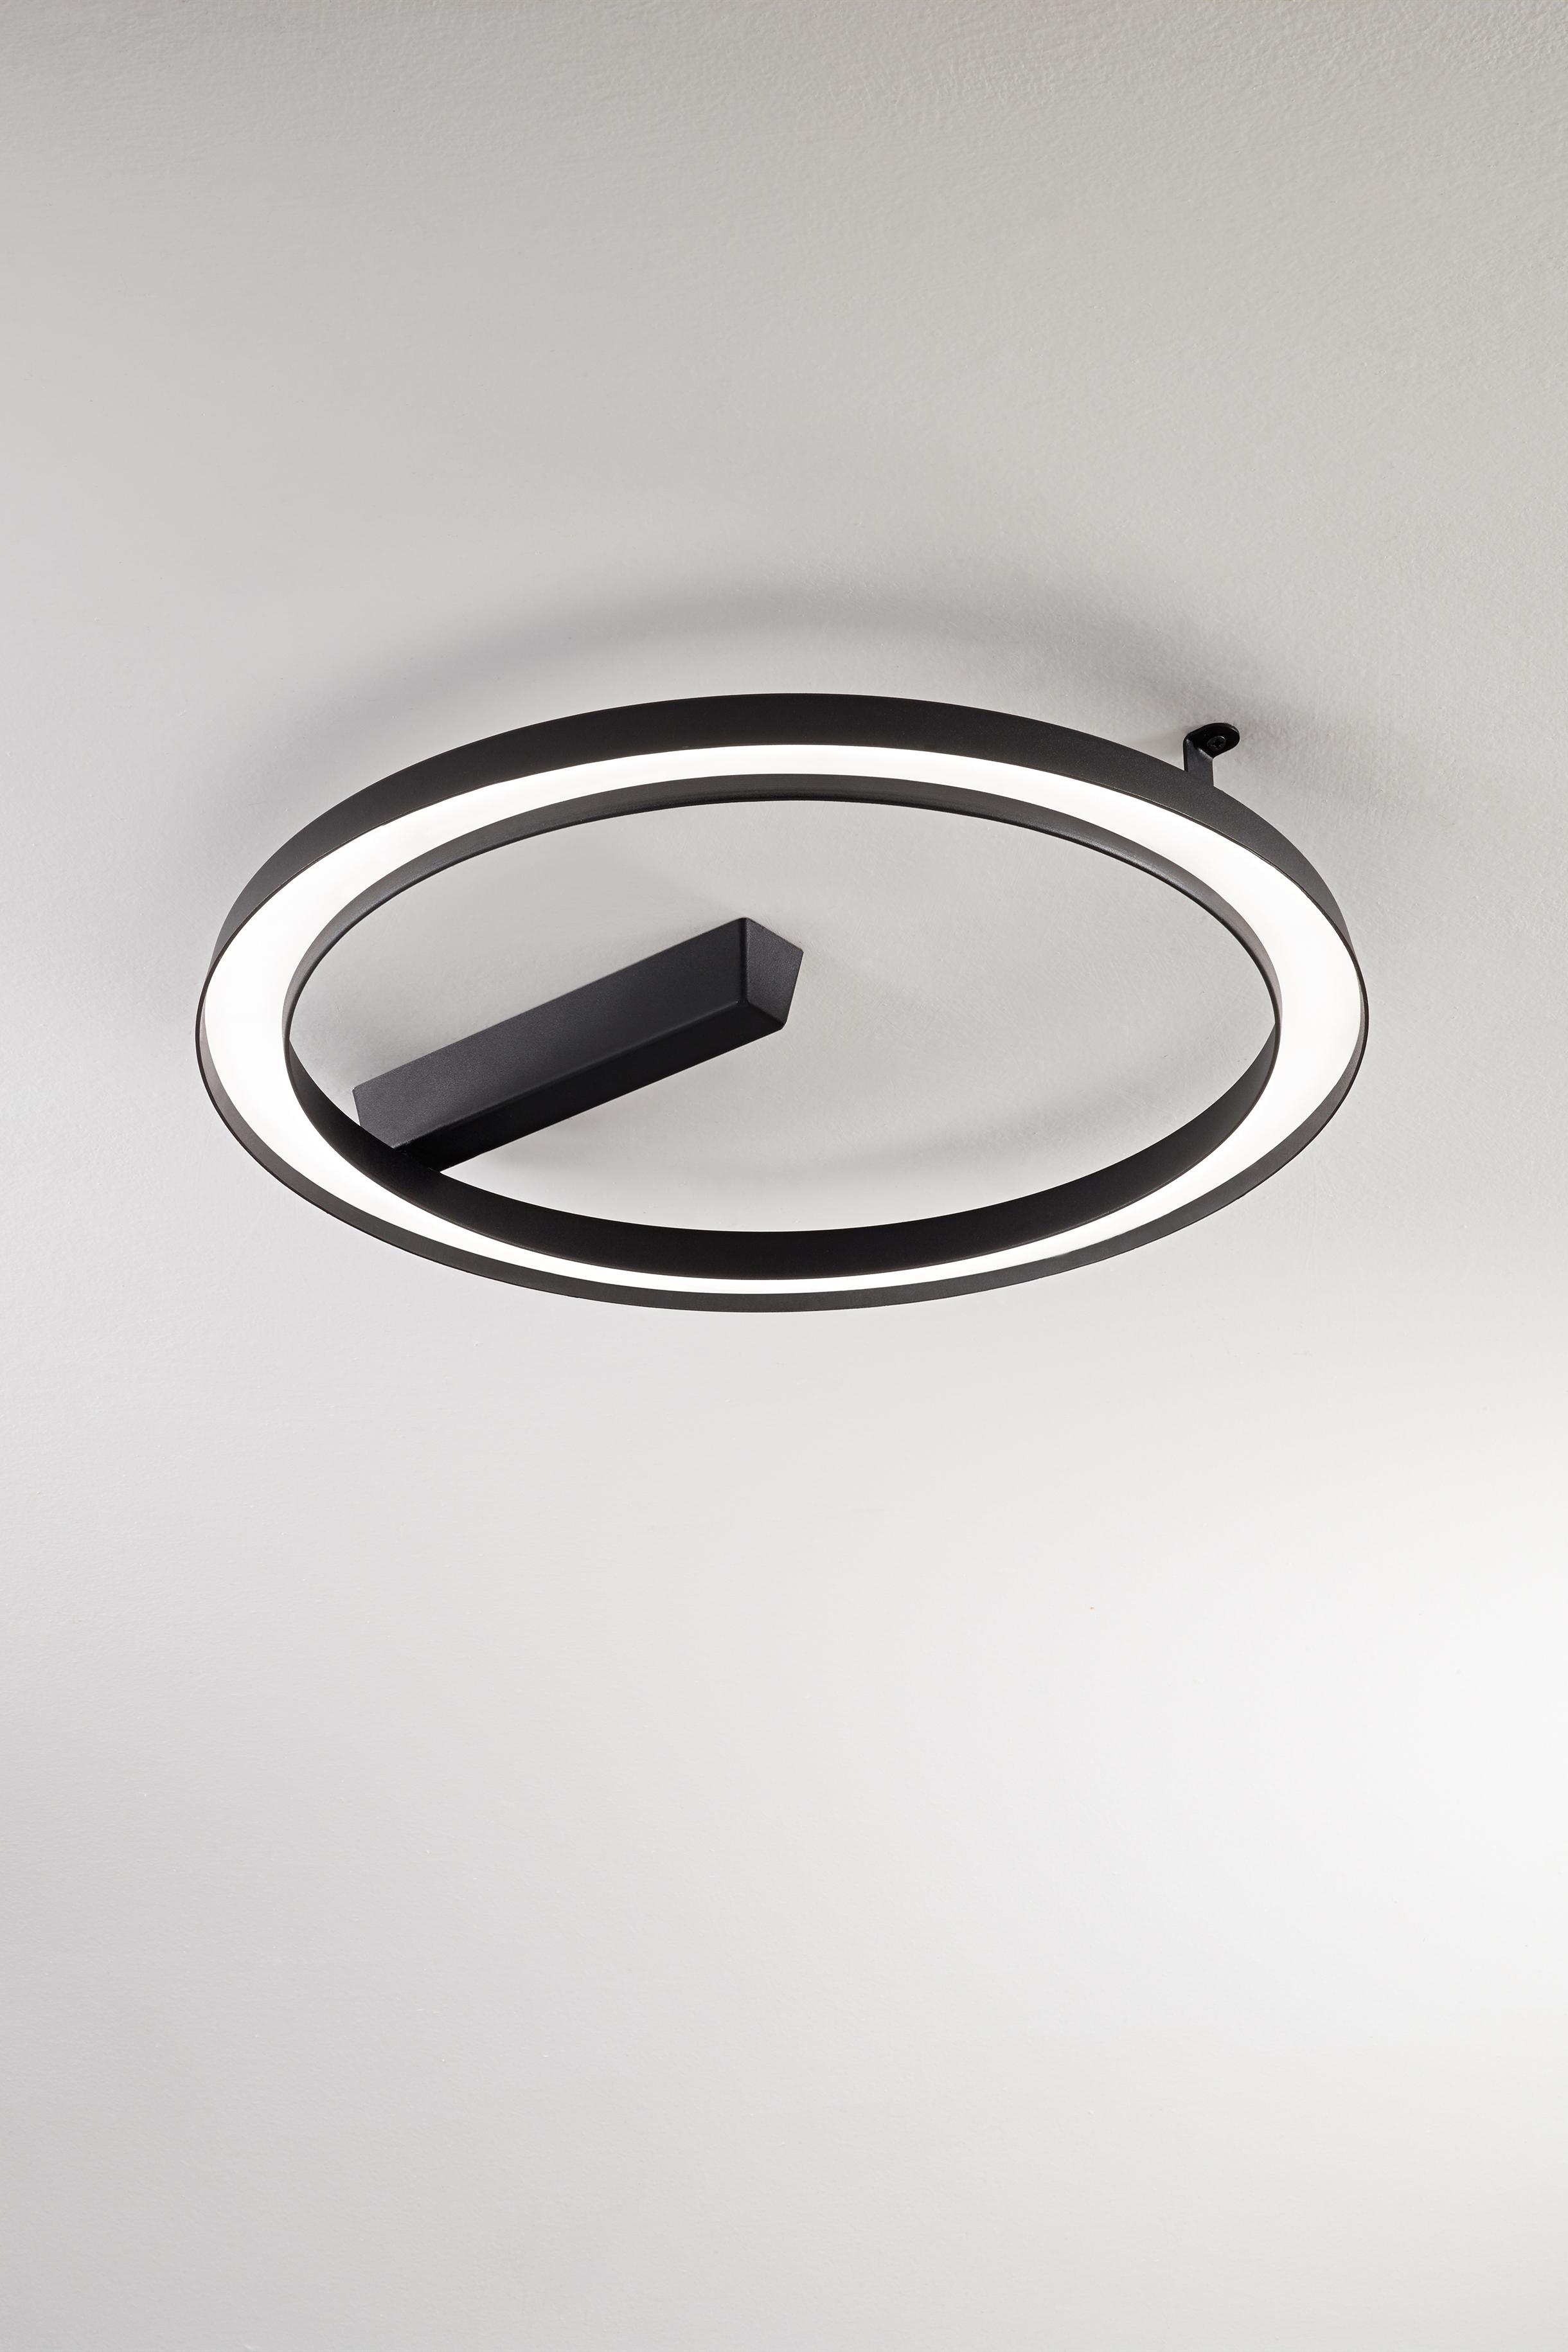 Gallery Product Lira Sr Ceiling Linealightgroup 1280X1920